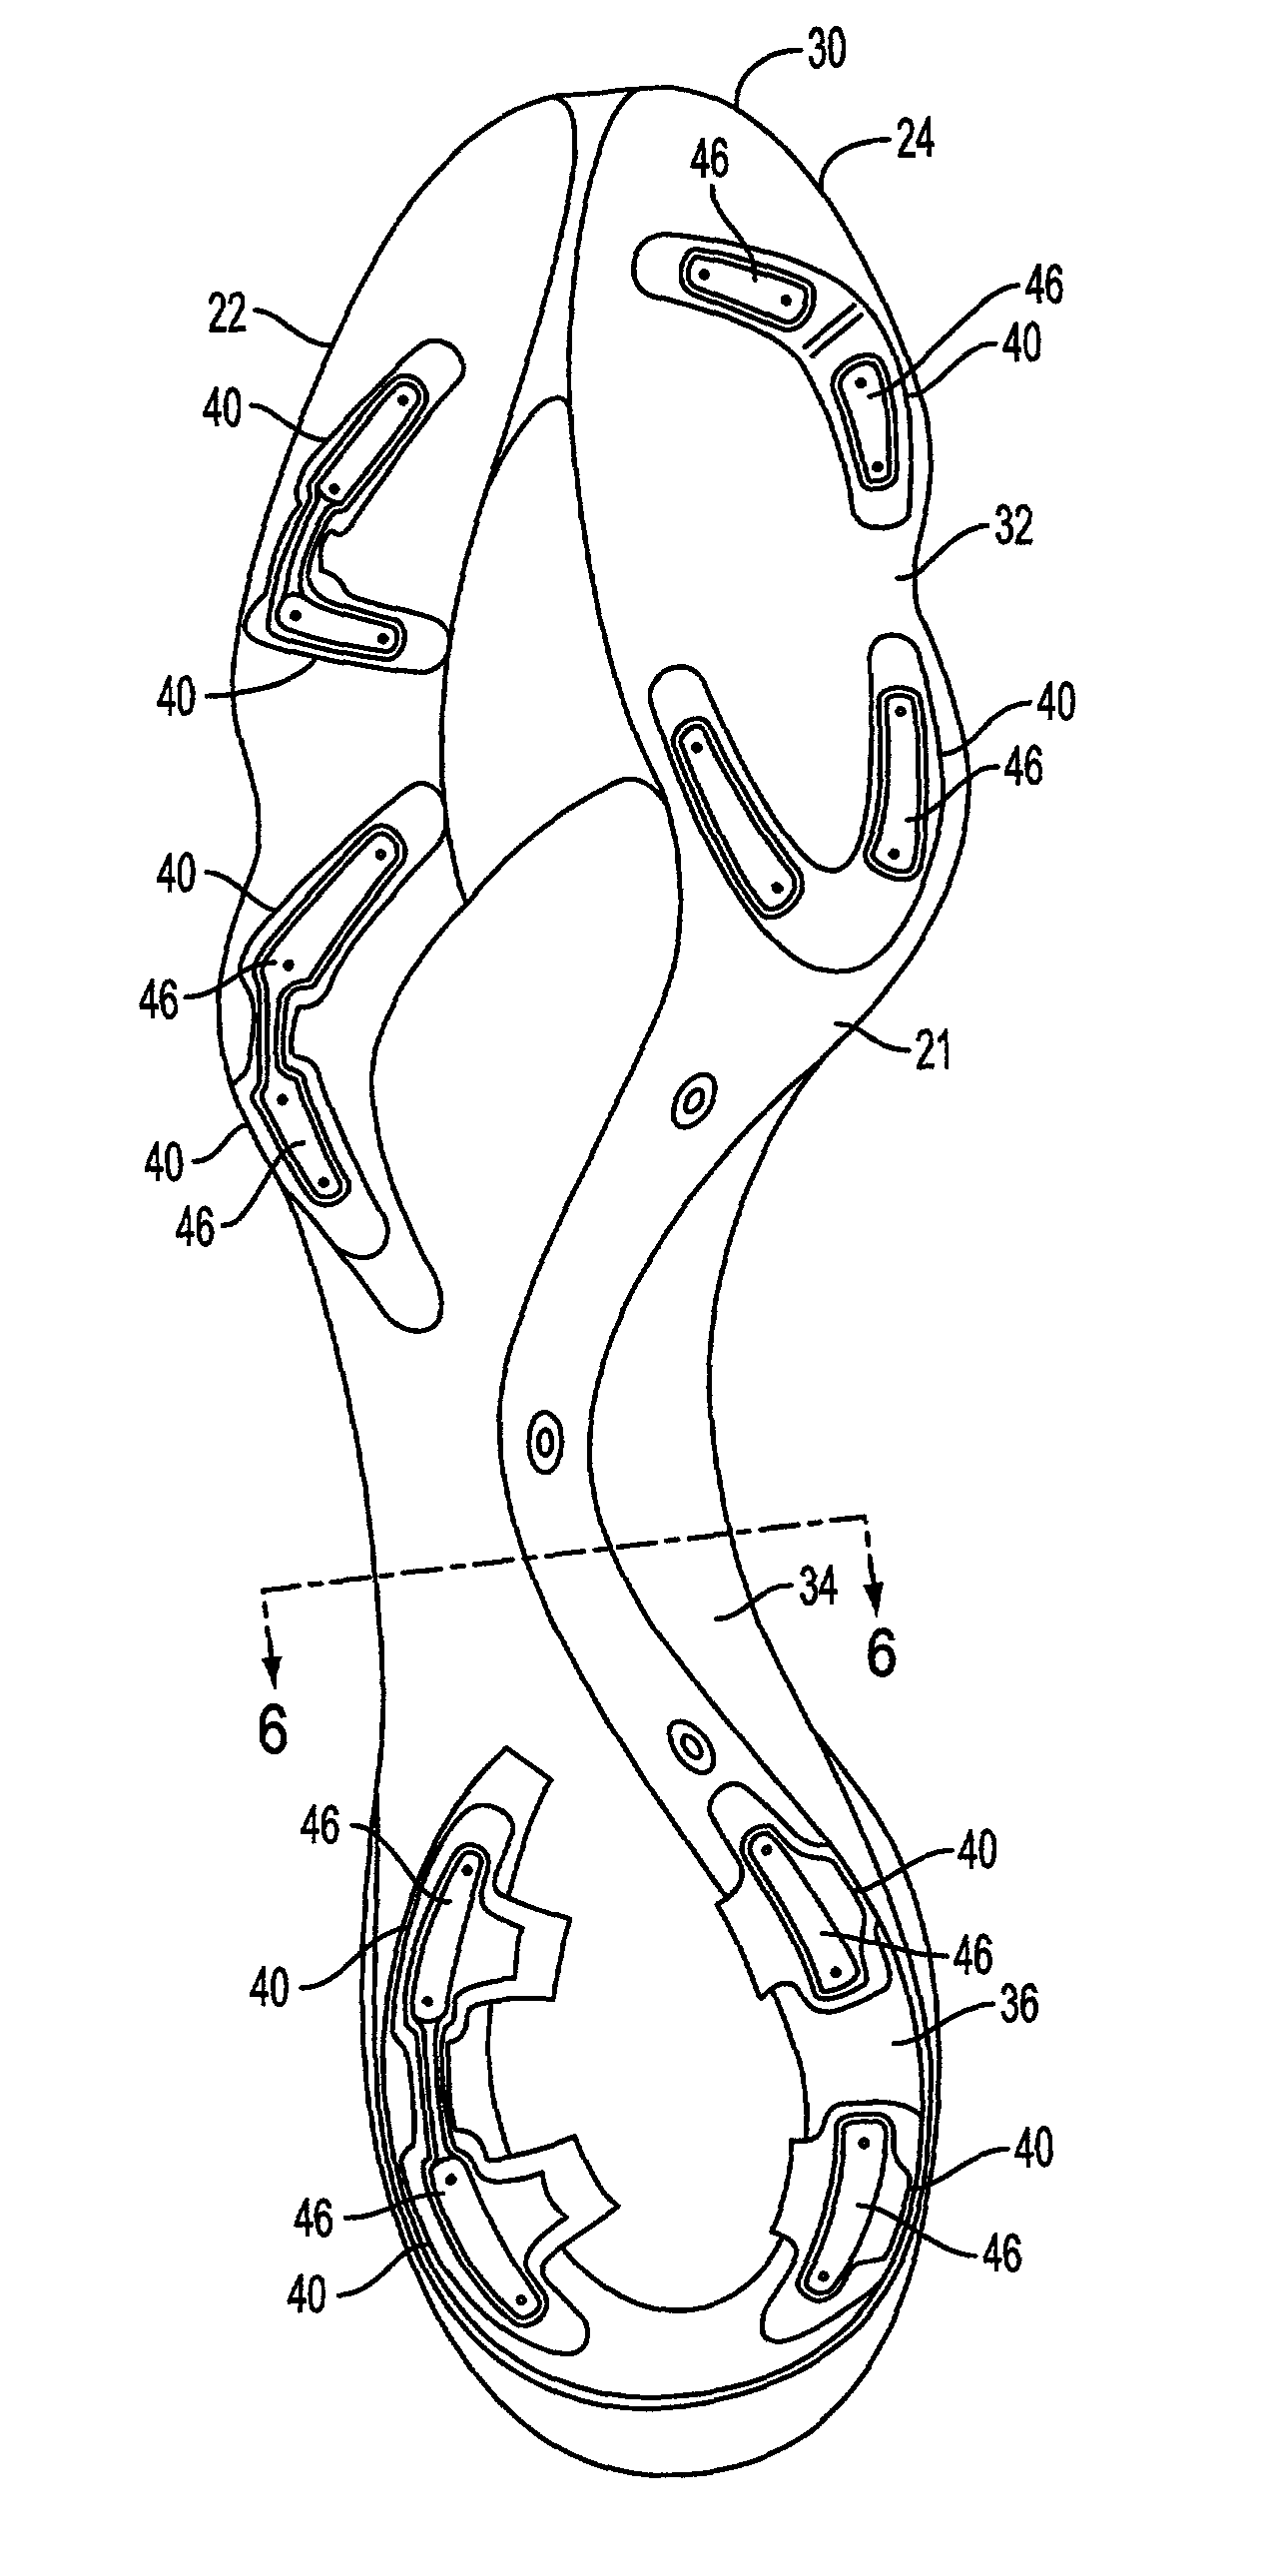 Article of footwear having a sole with a flex control member